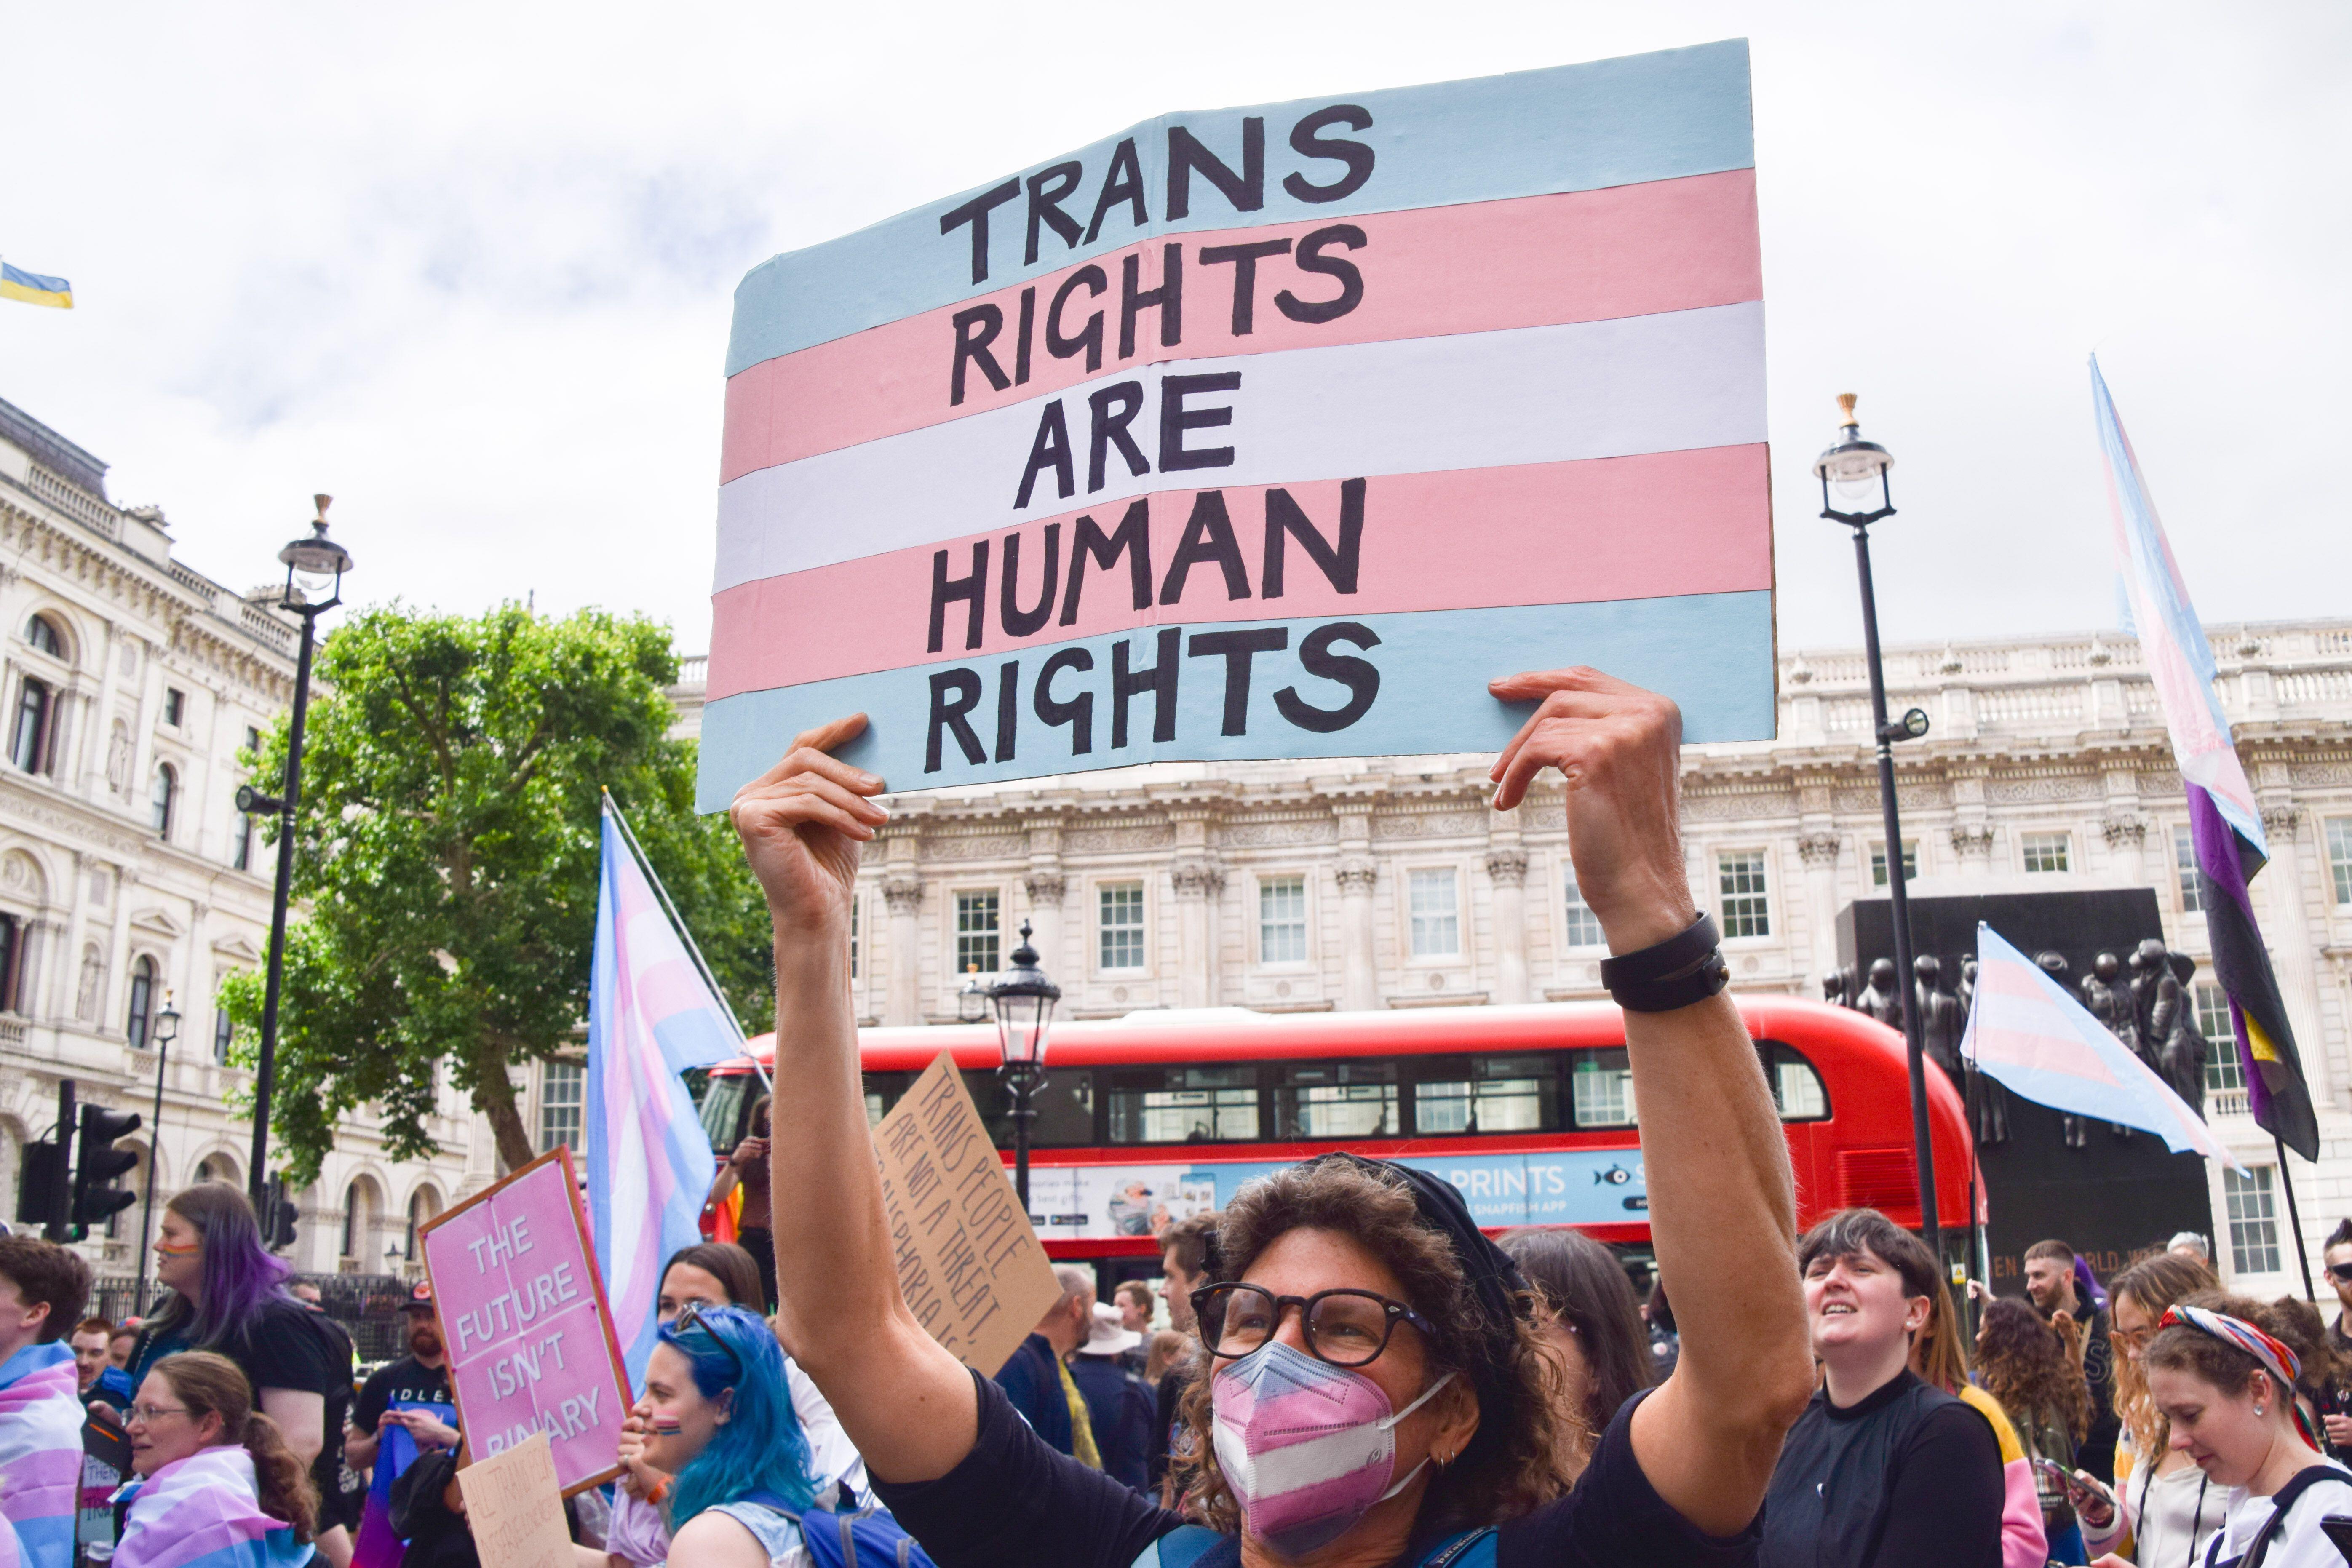 A photo of a protest with a person in the foreground holding up a large sign that reads "TRANS RIGHTS ARE HUMAN RIGHTS" in bold black letters on a pink and light blue striped background. The person is wearing a face mask and glasses, and other protestors can be seen in the background with various signs.